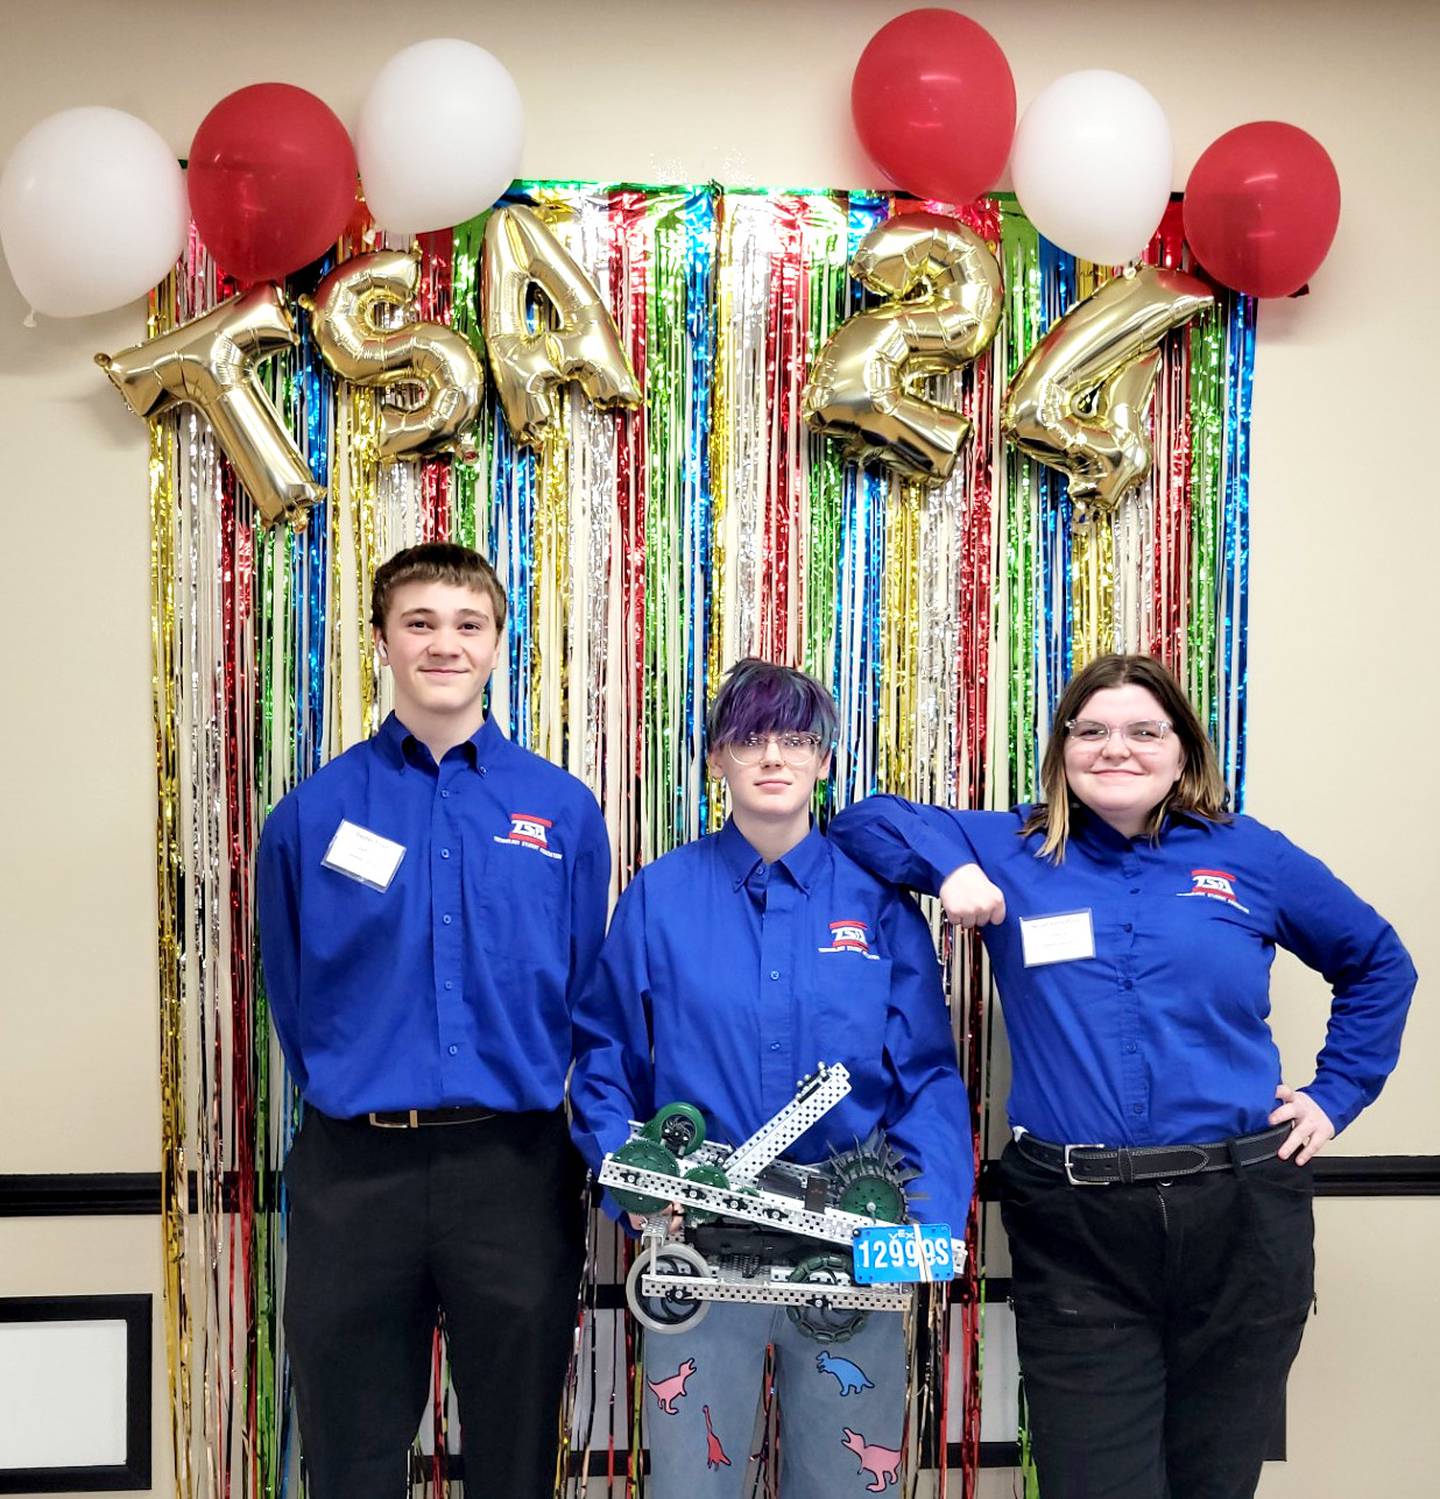 Team S poses with their robot after placing second at the State TSA and VEX Robotics contest. From left to right: Stephen Sistad, Paytin Smith, Nevaeh Kerns-Potter. Missing in this image is Jenna Orr, who is also on Team S.